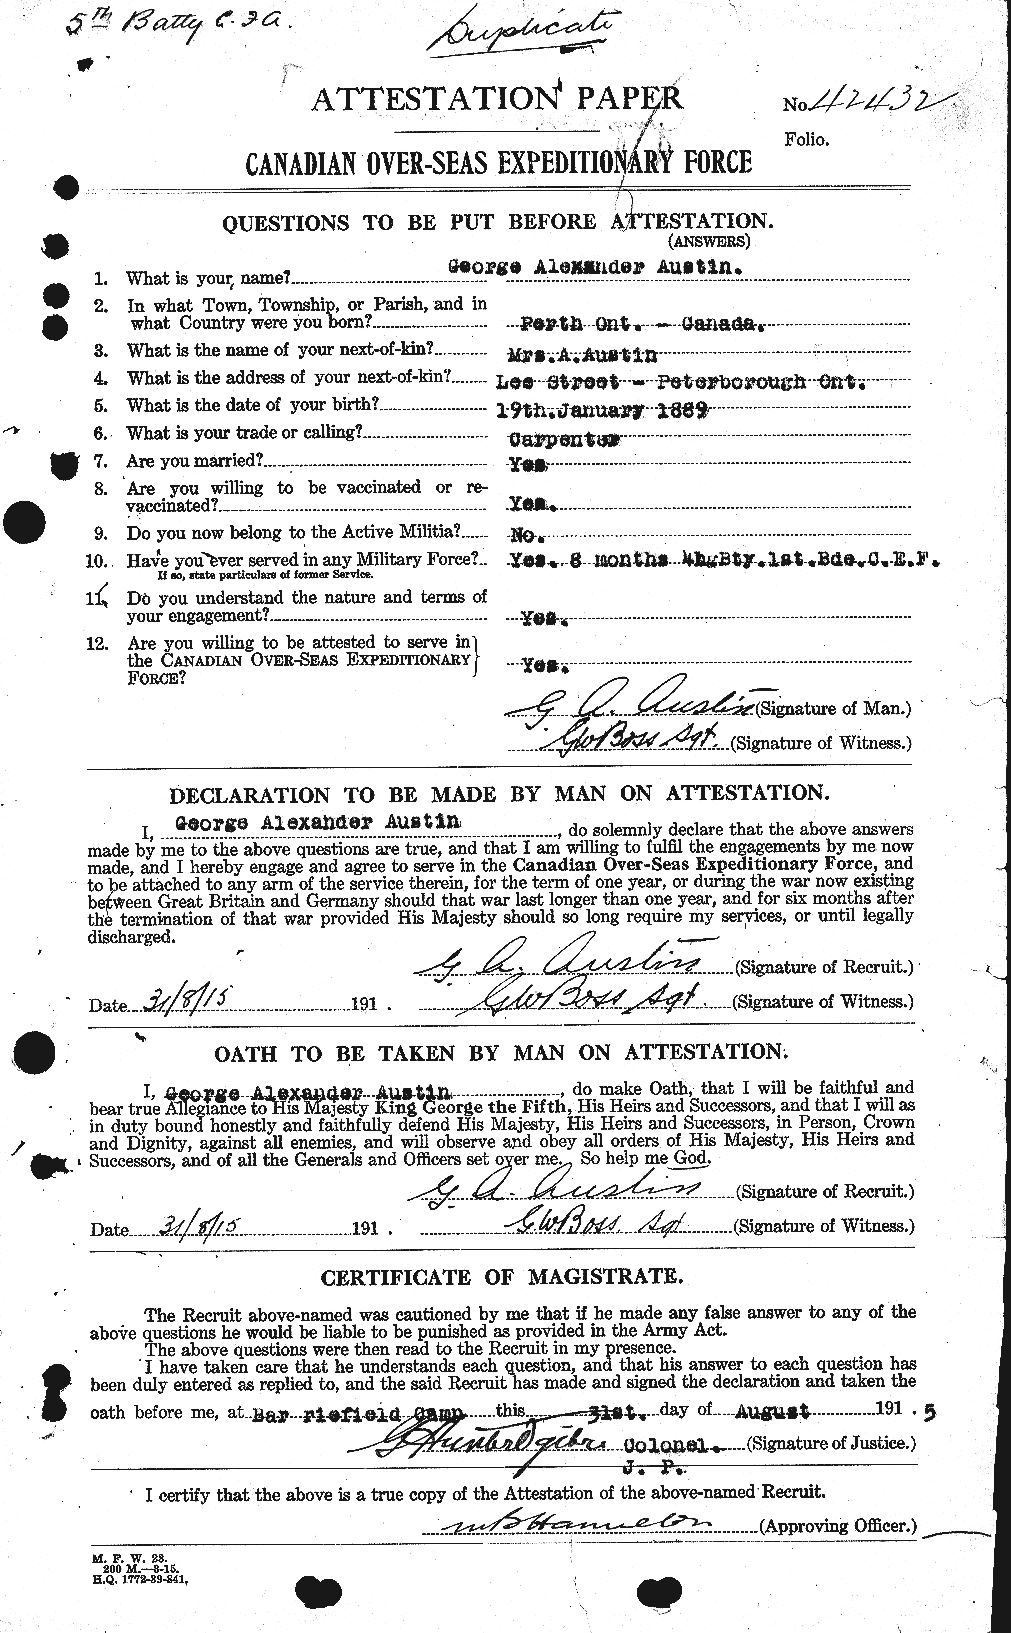 Personnel Records of the First World War - CEF 215385a